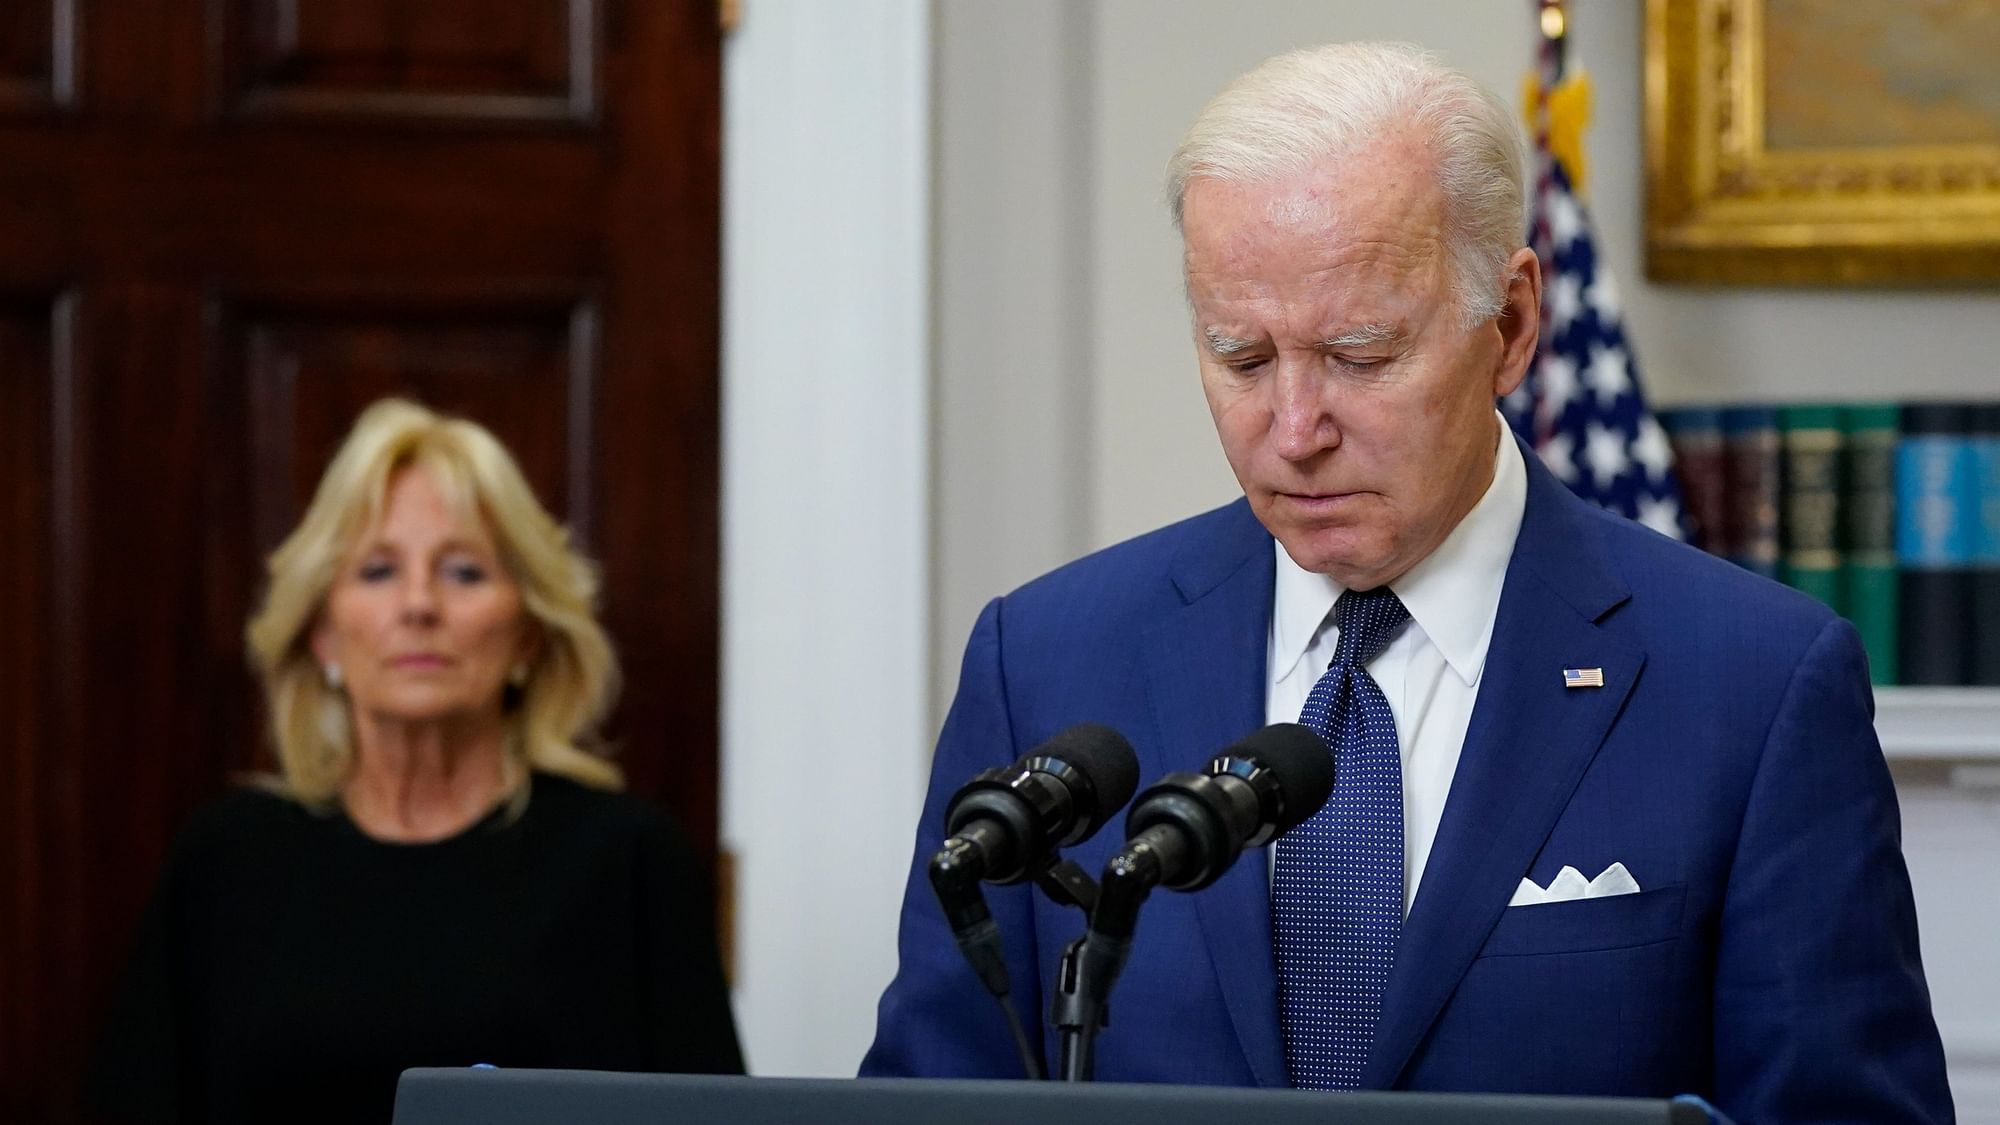 <div class="paragraphs"><p>President Joe Biden pauses as he speaks about the mass shooting at Robb Elementary School in Uvalde, Texas, from the Roosevelt Room at the White House, in Washington, Tuesday, 24 May, 2022, as first lady Jill Biden listens.</p></div>